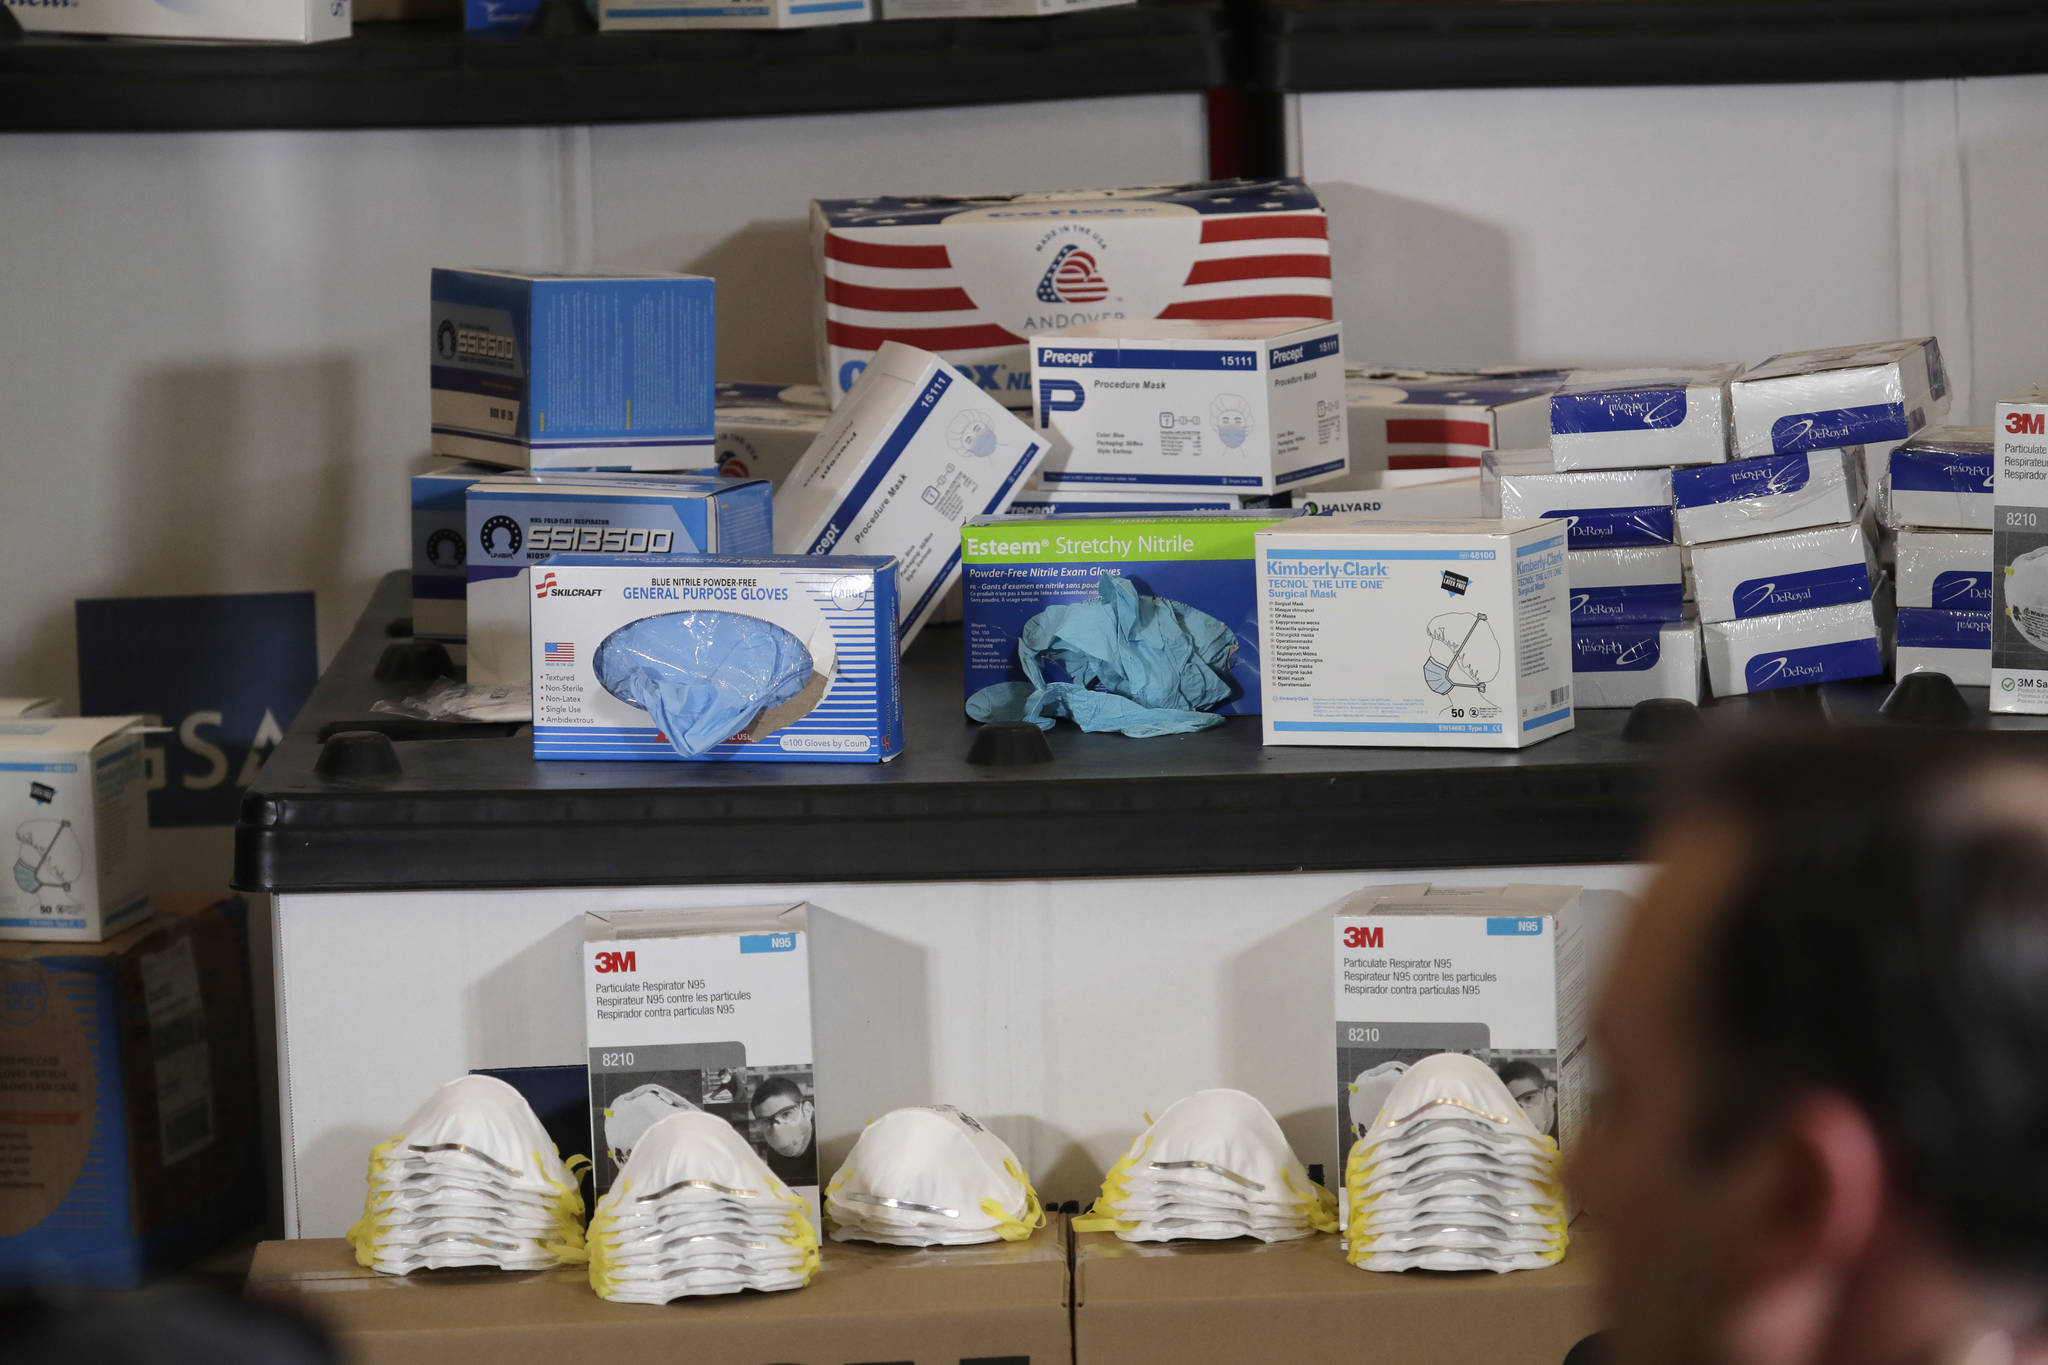 Masks, gloves, and other protective supplies are displayed during a visit of Vice President Mike Pence, Thursday, March 5, 2020 to Camp Murray in Washington state. Pence was in Washington to discuss the state’s efforts to fight the spread of the COVID-19 coronavirus. (AP Photo/Ted S. Warren)